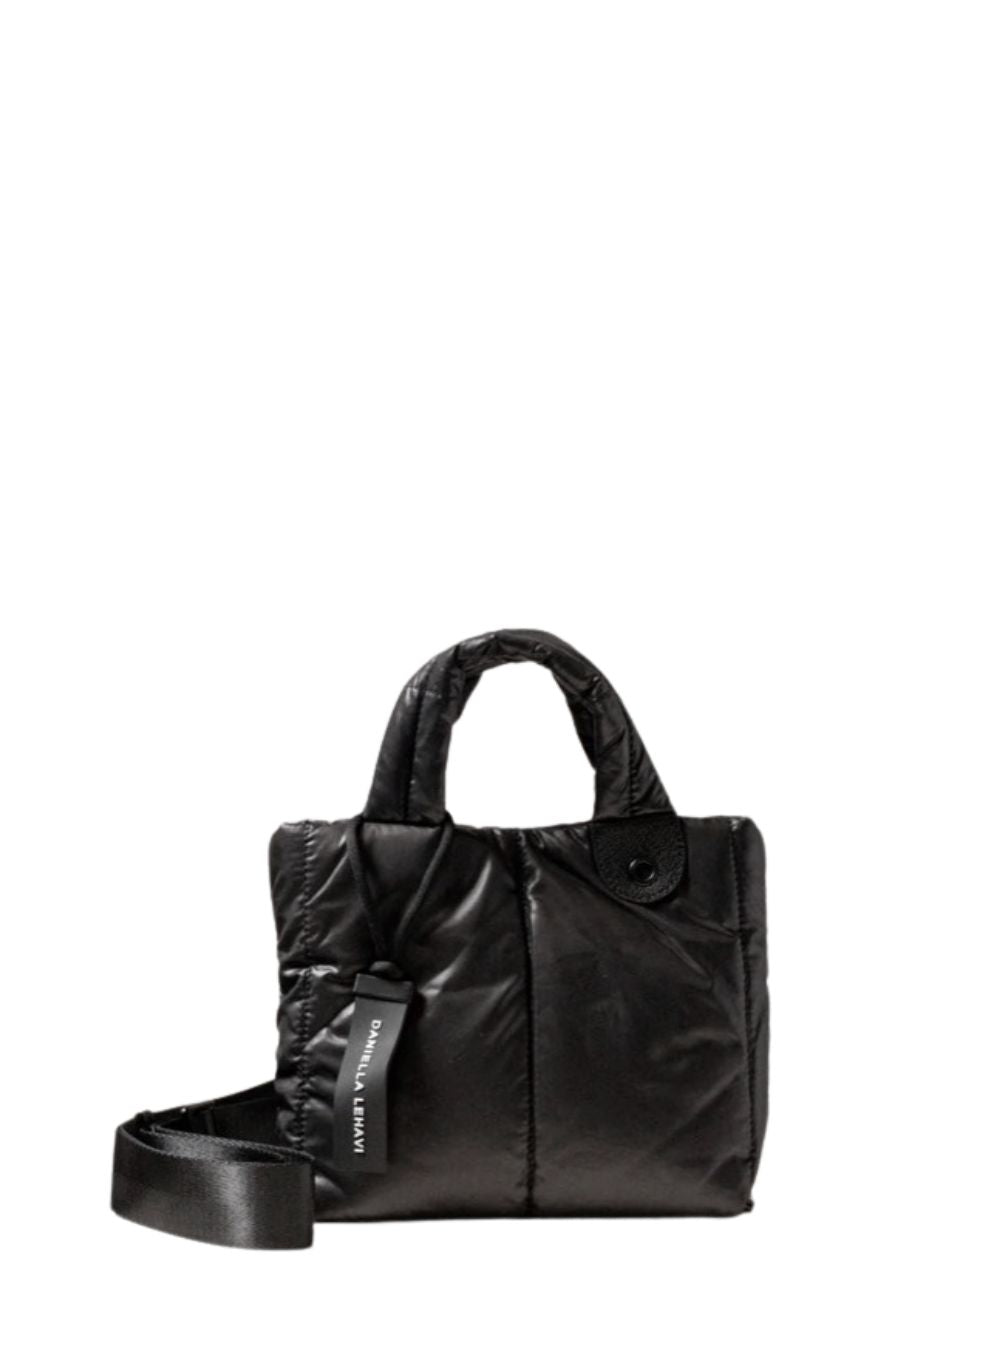 Gymshark Quilted Mini Tote - Black